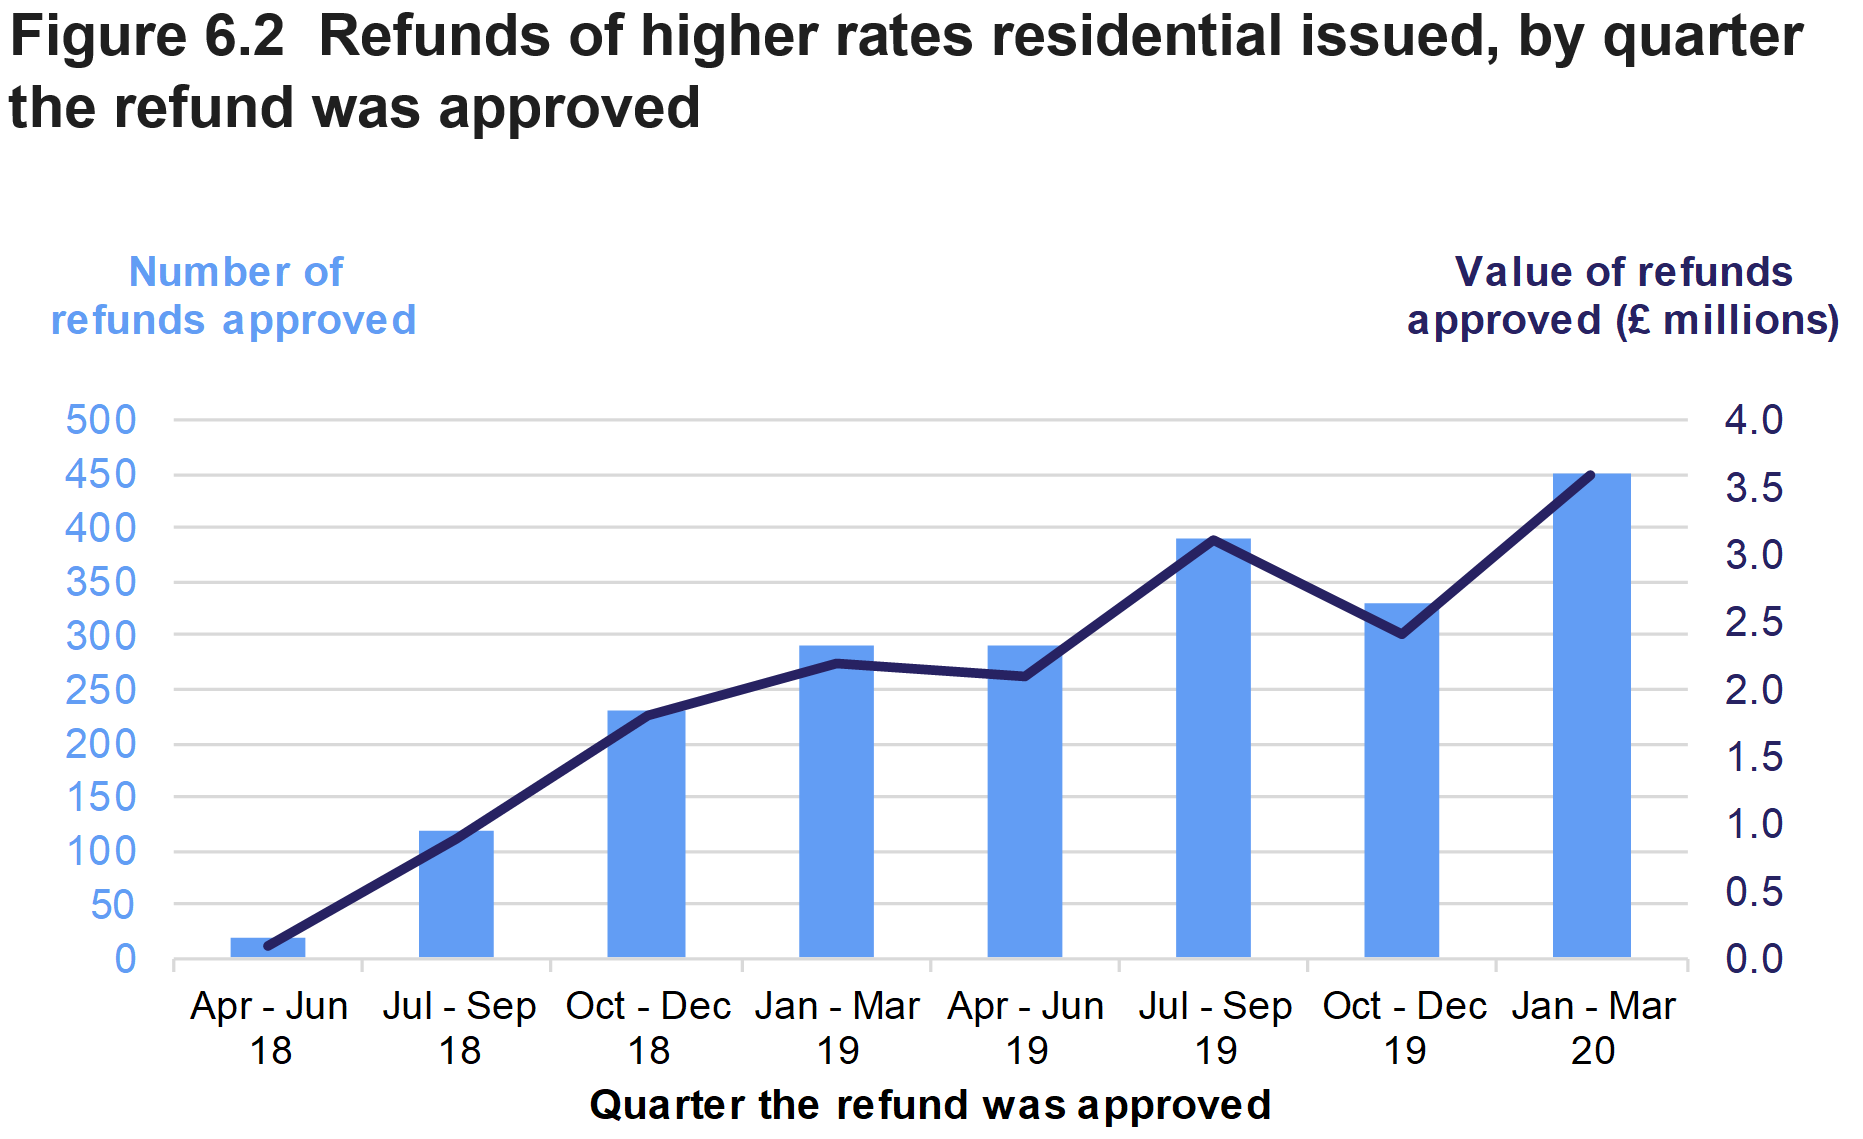 Figure 6.2 shows the number and value of refunds for higher rates residential issued, by the quarter in which the refund was approved by the WRA.